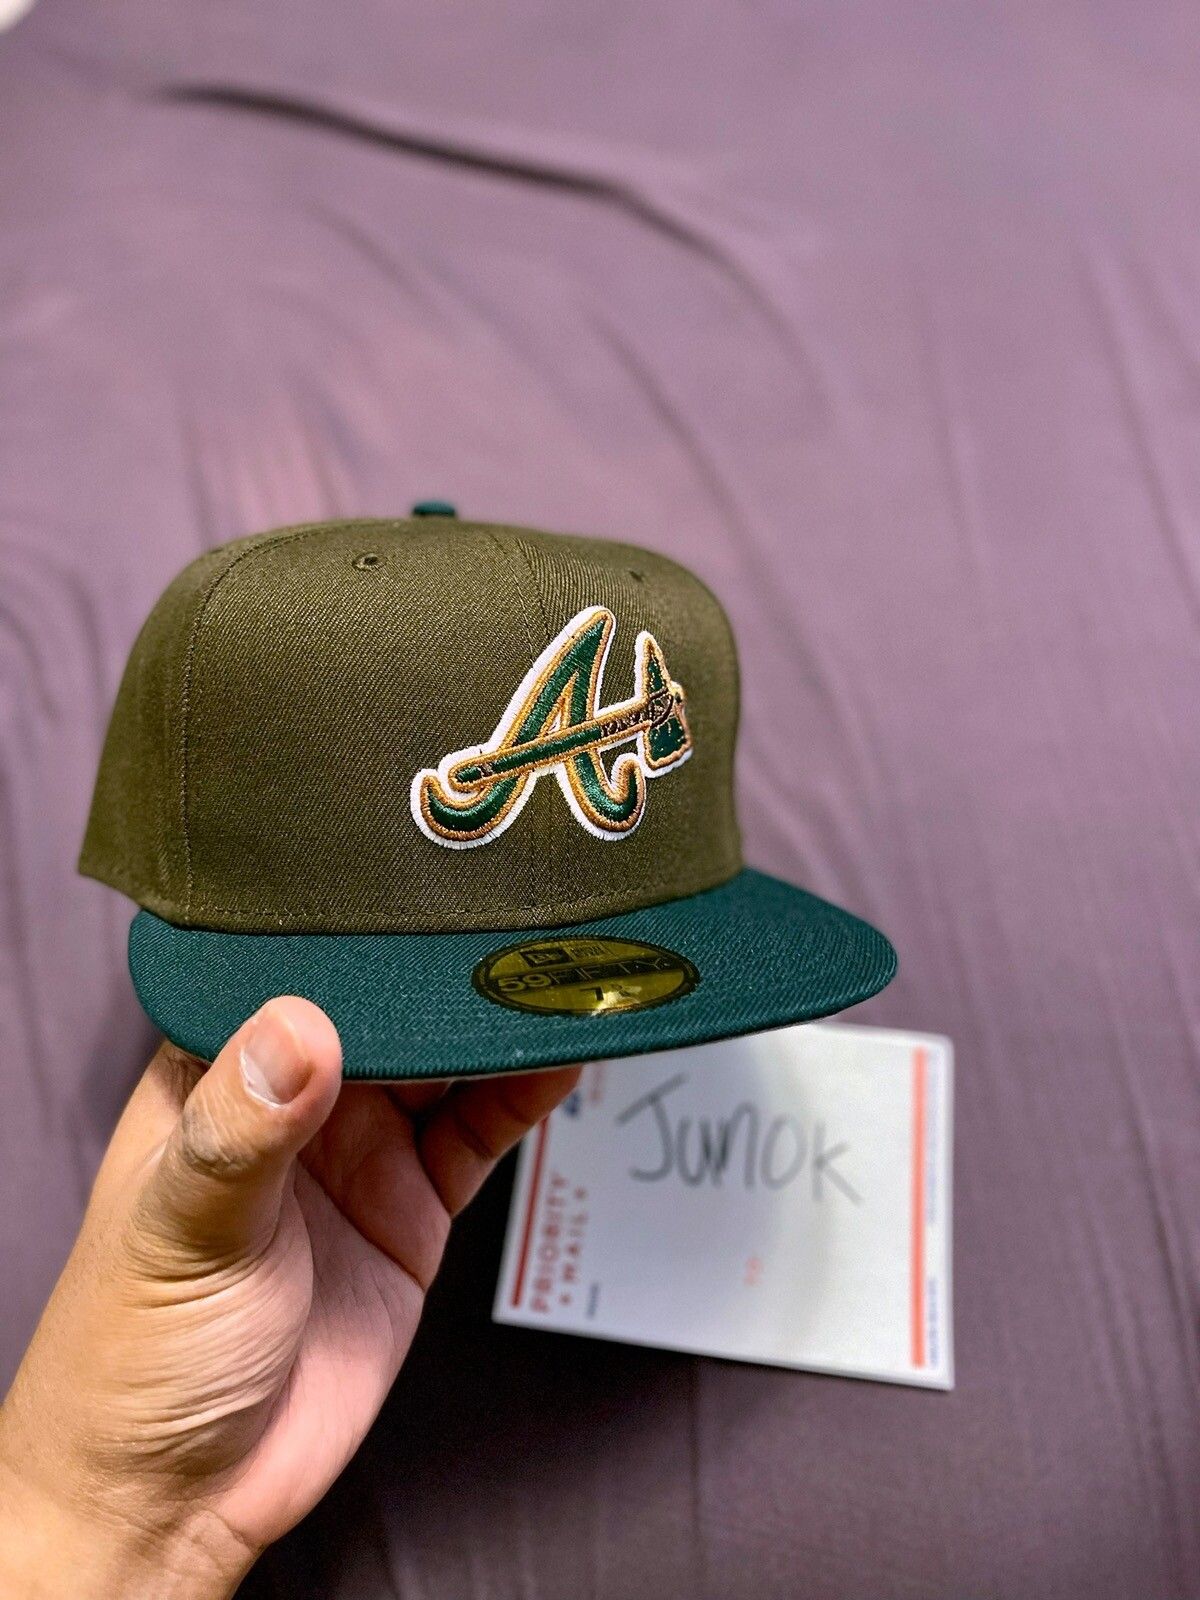 Anaheim Angels Hat Size 7 3/8 for Sale in Los Angeles, CA - OfferUp